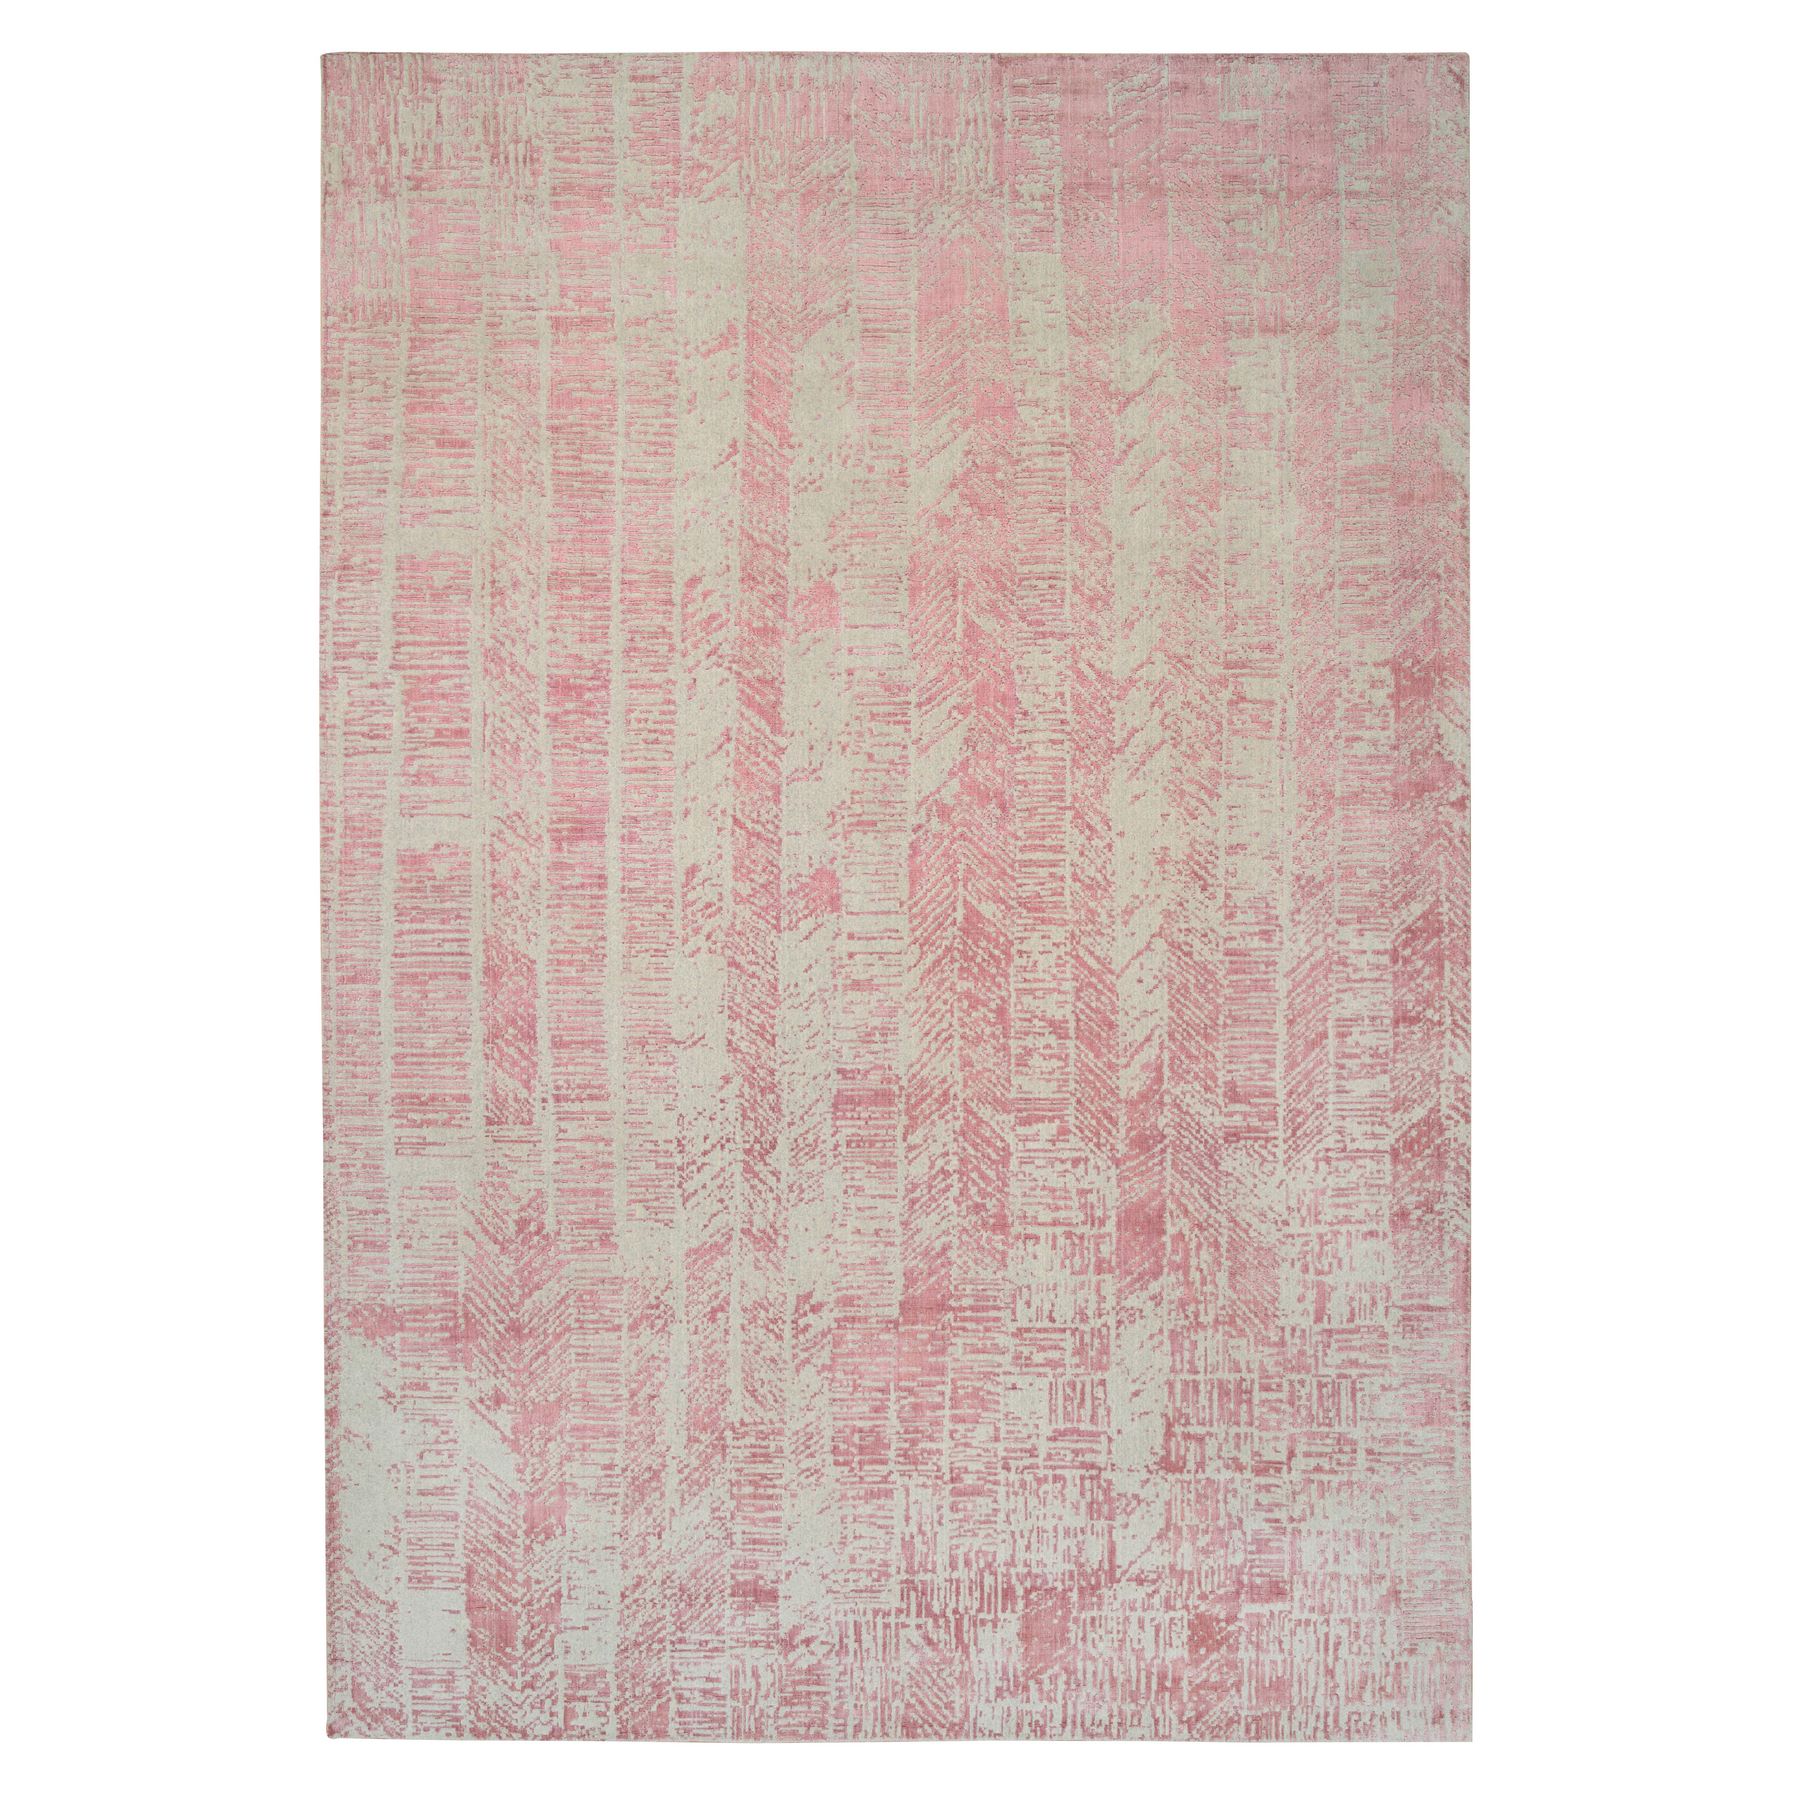 11'10"x17'10" Rose Pink, All Over Design Wool and Art Silk, Jacquard Hand Loomed, Oversized Oriental Rug 